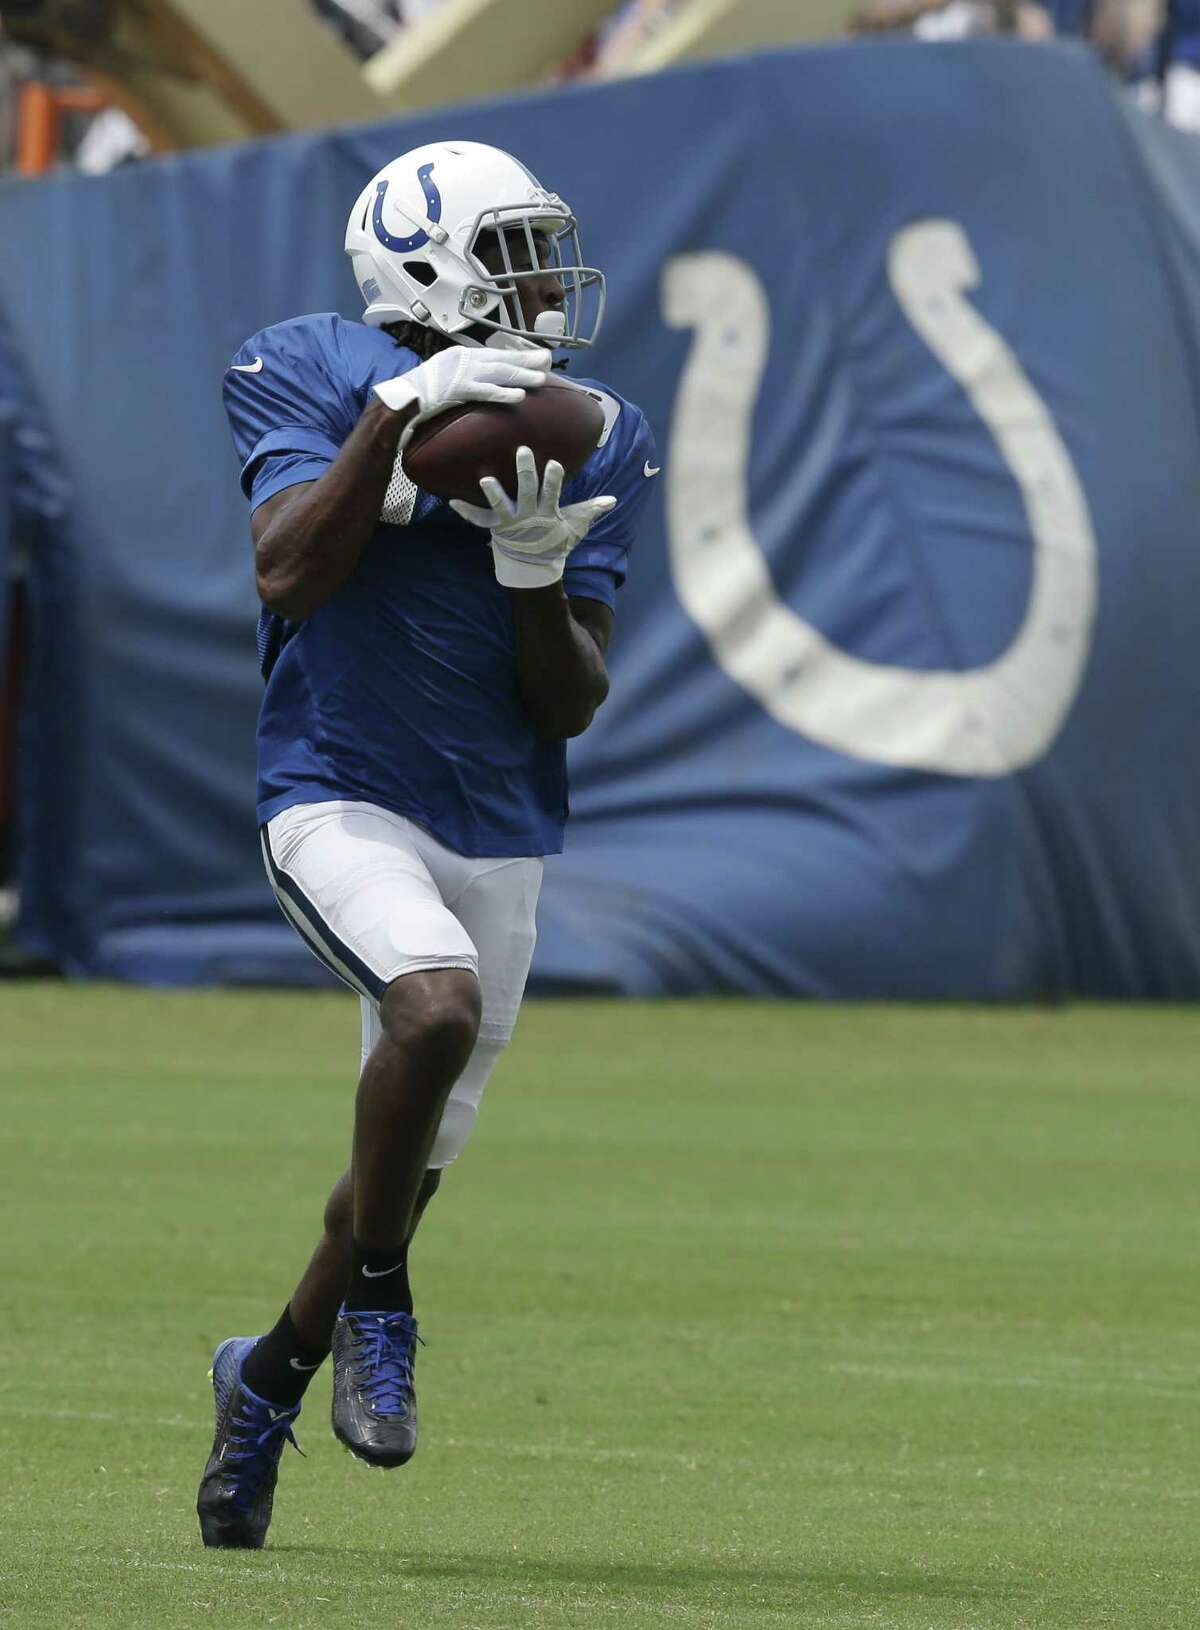 Indianapolis Colts wide receiver T.Y. Hilton makes a catch during training camp on Monday.